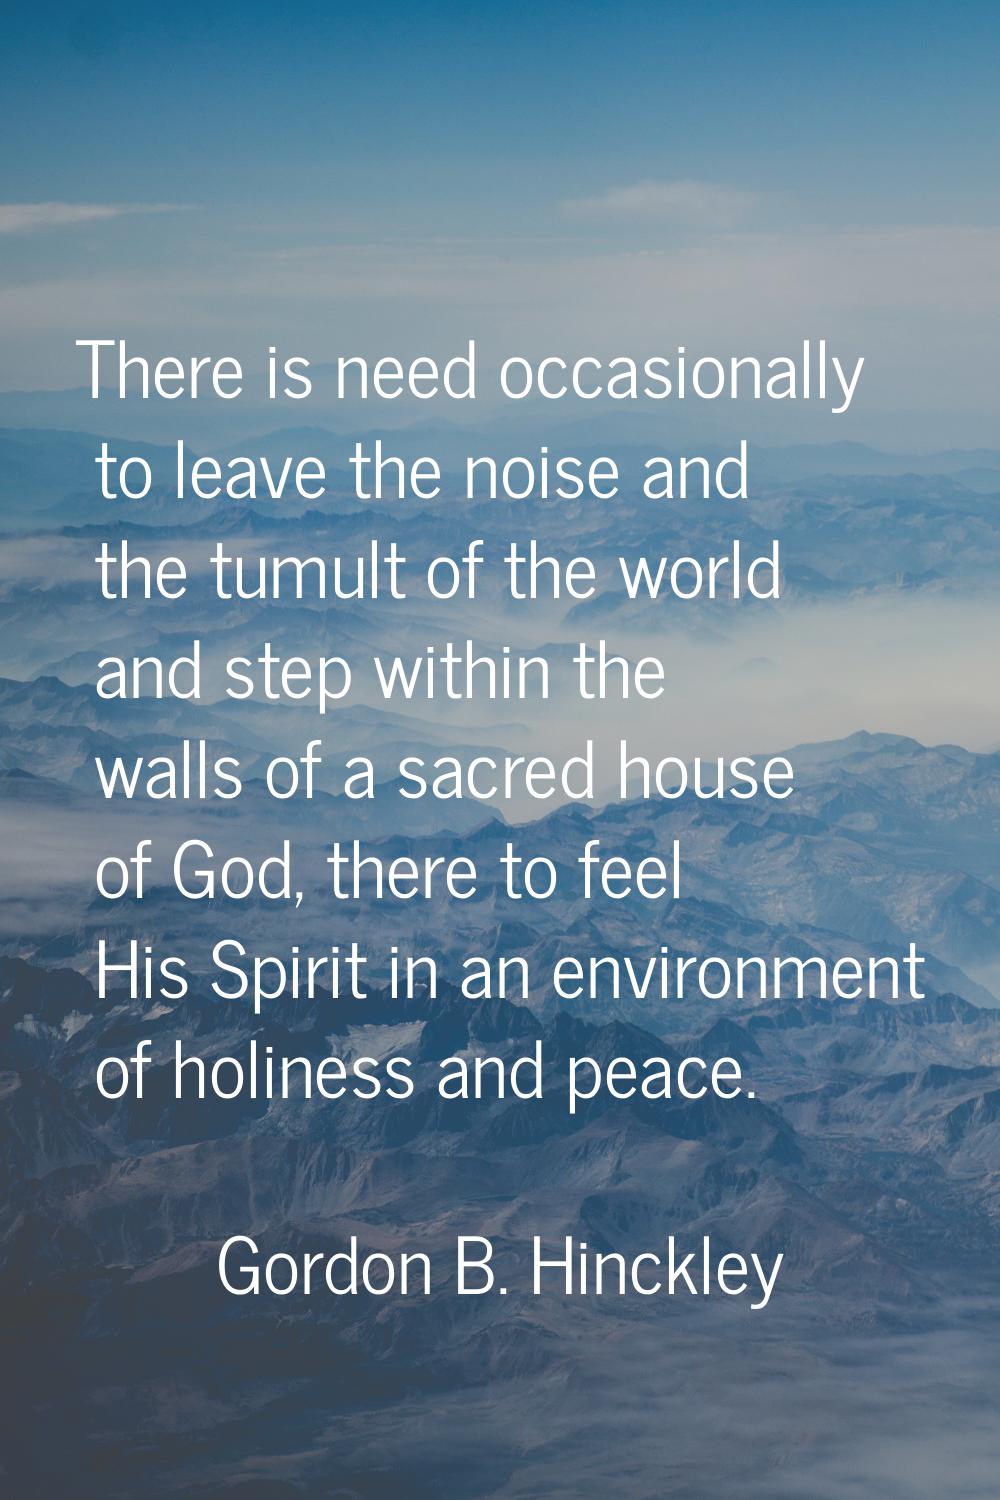 There is need occasionally to leave the noise and the tumult of the world and step within the walls